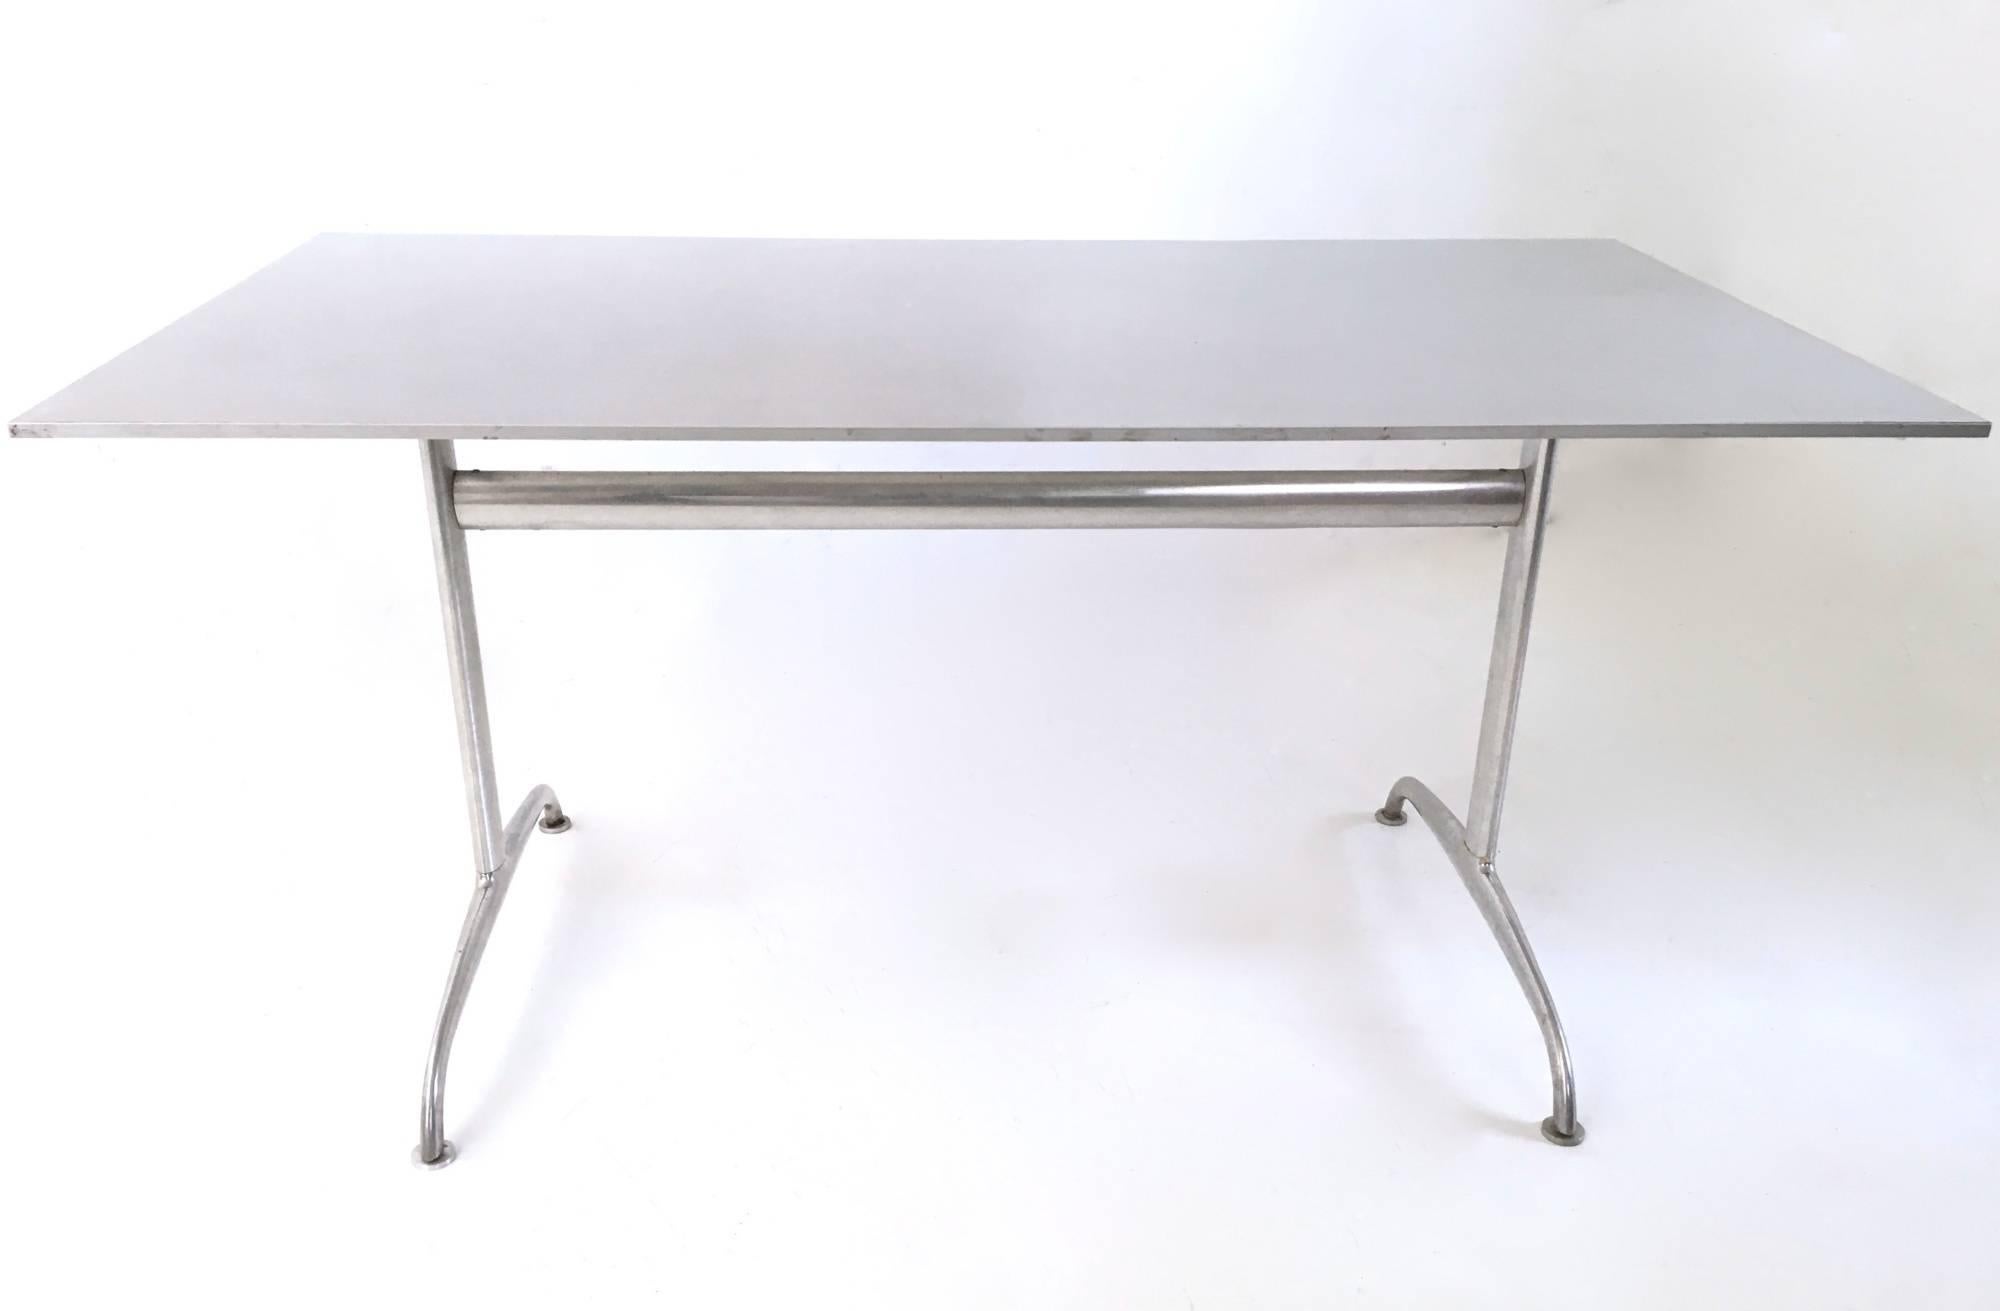 Made in aluminum.
It is in excellent original condition but may show traces of use on the top, which are imperceptible.